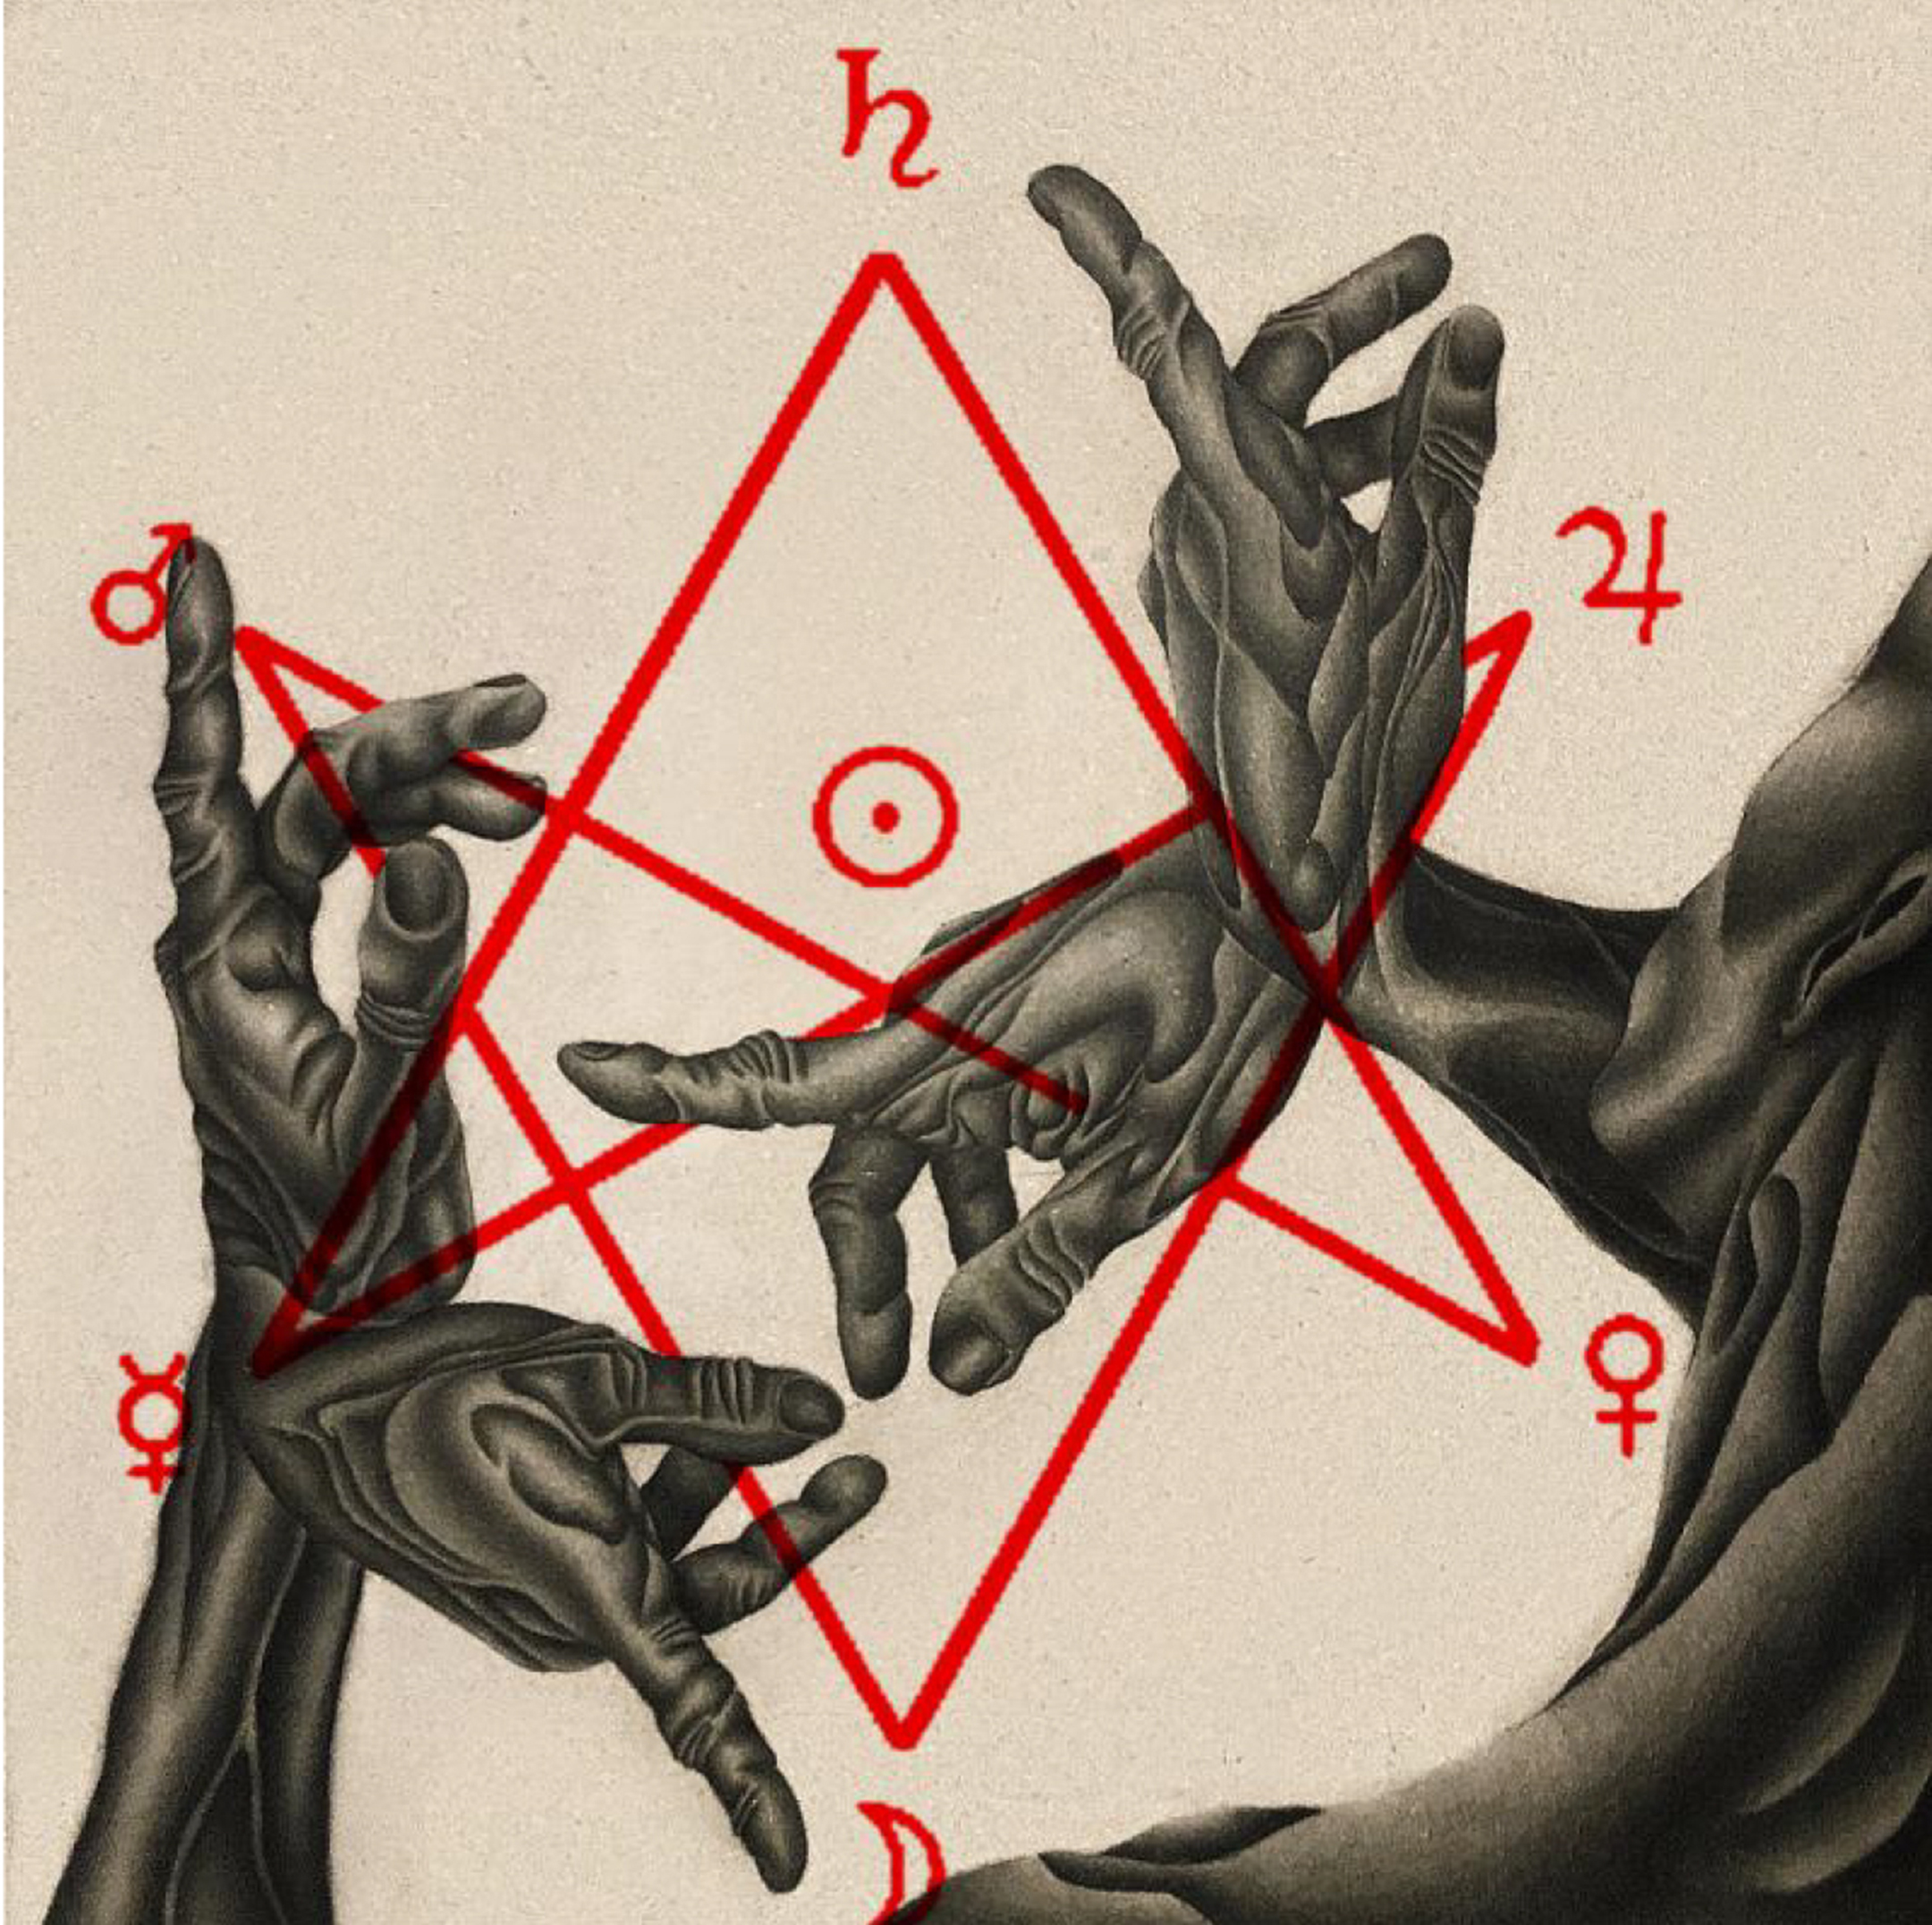 Painting of four hands, intermingled and pointing in different directions, with a red star-like chart with symbols printed over the hands